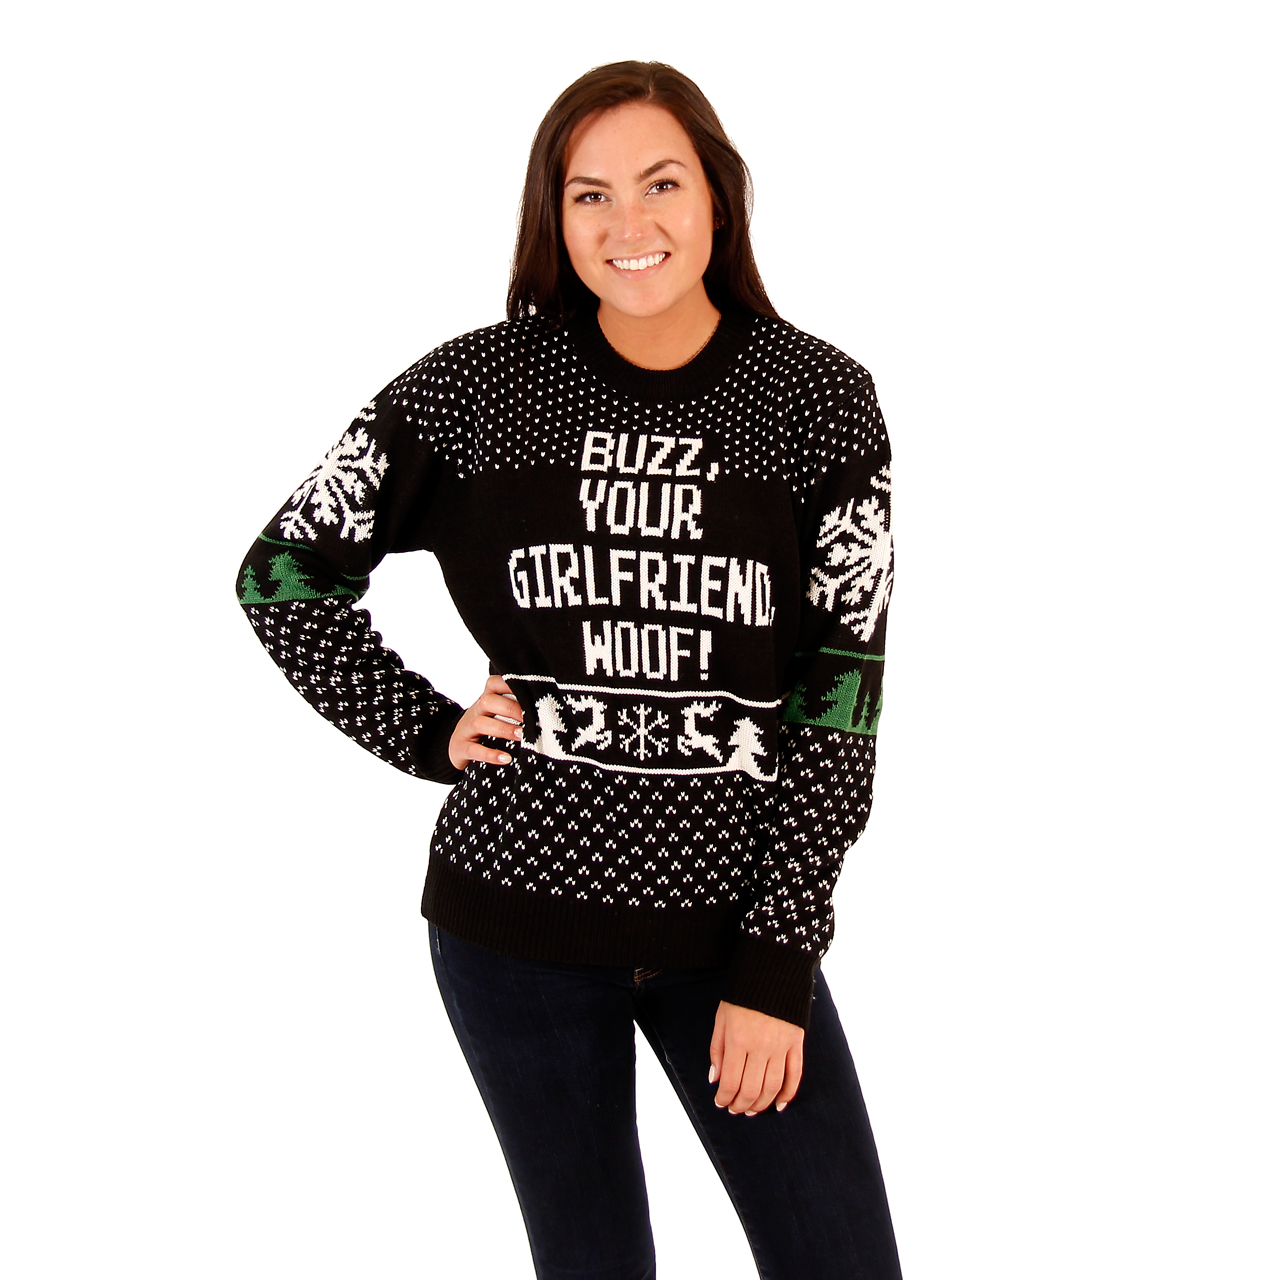 Women’s Buzz, Your Girlfriend, Woof! Sweater,Ugly Christmas Sweaters | Funny Xmas Sweaters for Men and Women